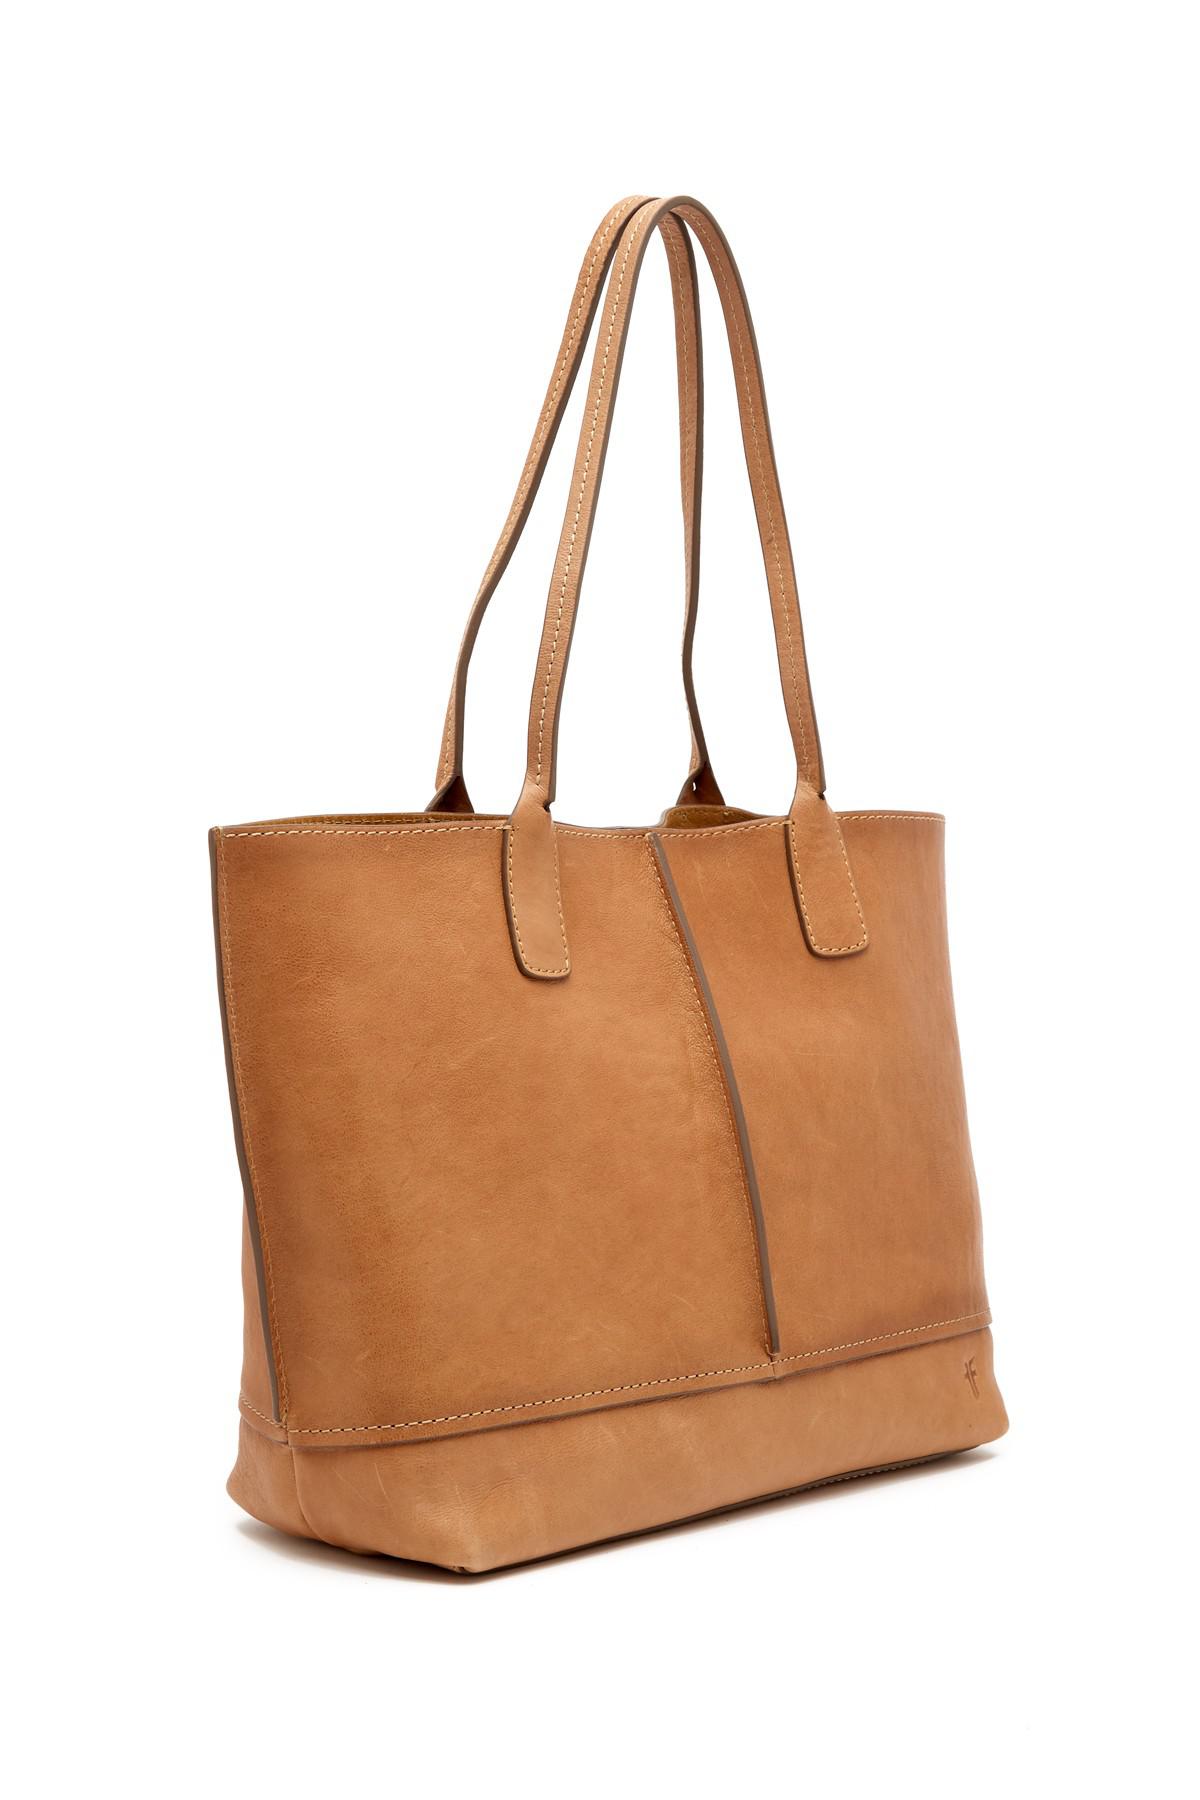 Lyst - Frye Lucy Leather Tote Bag in Natural